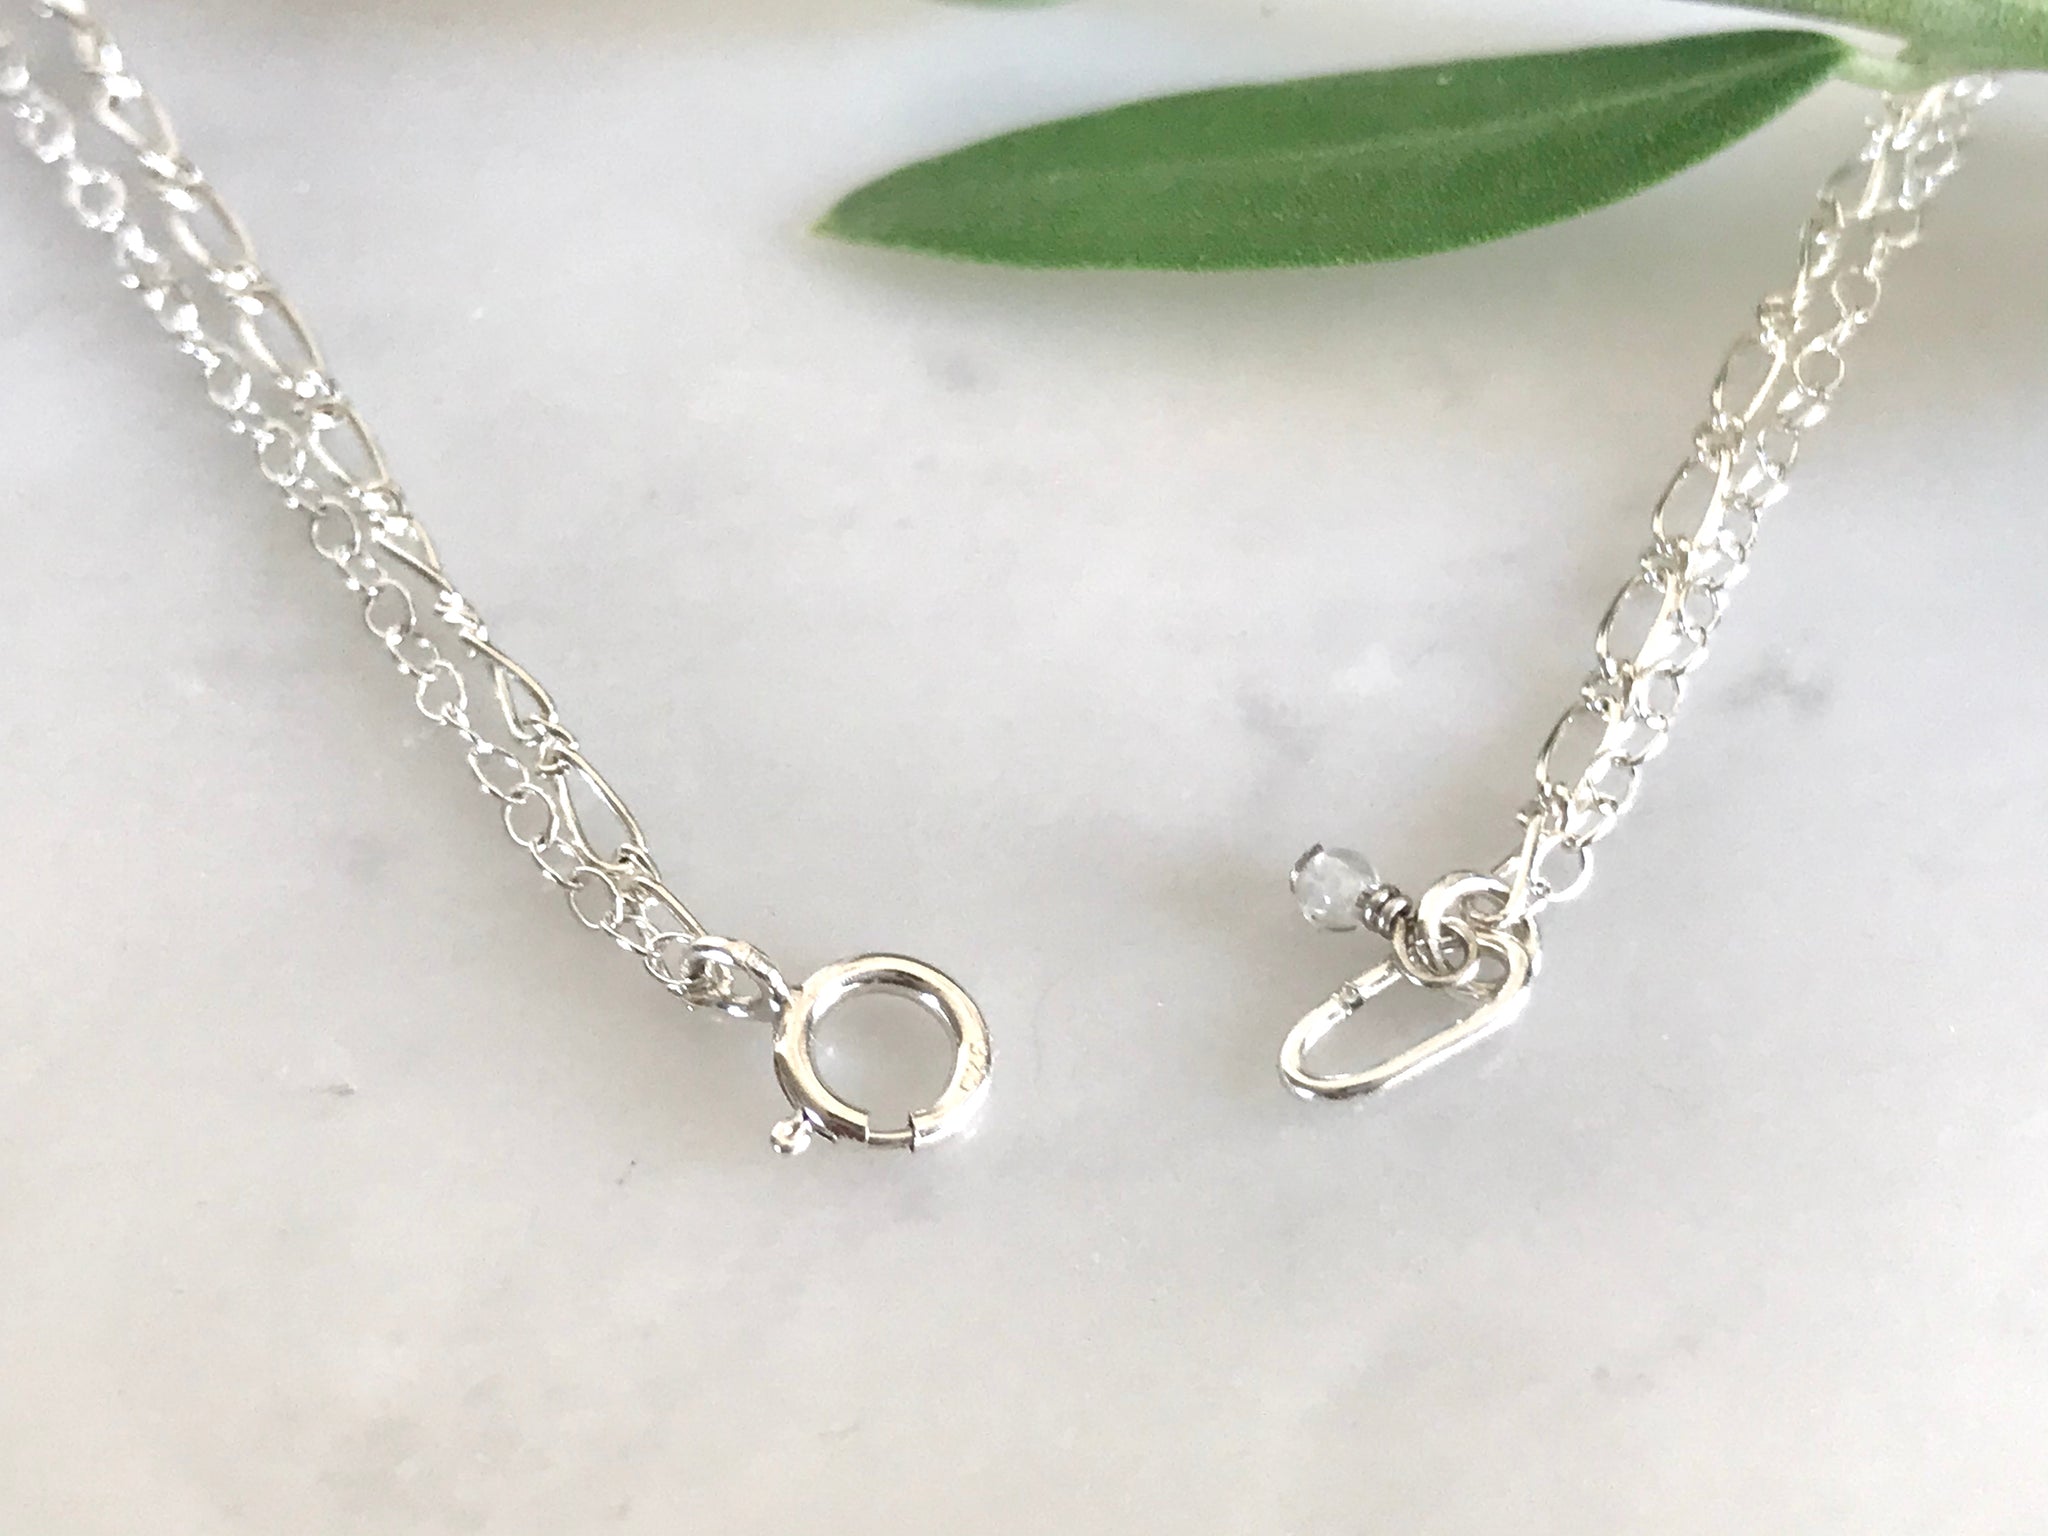 Chain Necklace 16"(40cm) Sterling Silver 925 /  チェーン　ネックレス  16"(40cm) スターリングシルバー925